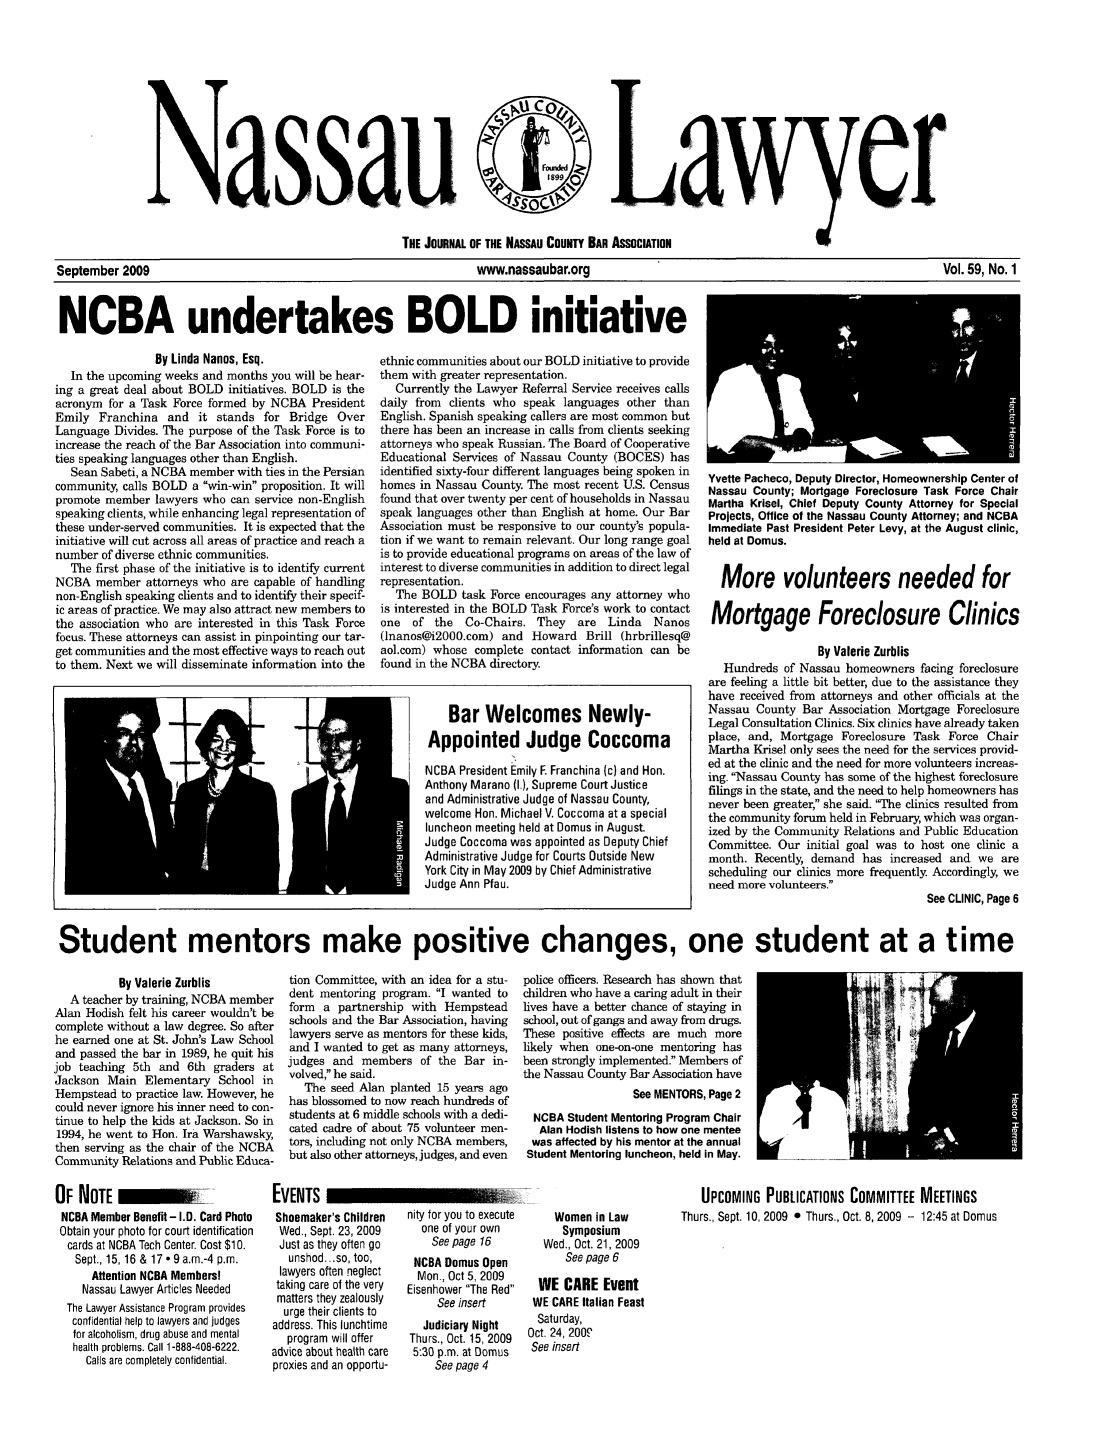 handle is hein.barjournals/nassau0059 and id is 1 raw text is: assau

ayr

THE JOURNAL OF THE NASSAU COUNTY BAR ASSOCIATION

September 2009                  www.nassaubar.org                  Vol. 59, No. 1
NCBA undertakes BOLD initiative

By Linda Nanos, Esq.
In the upcoming weeks and months you will be hear-
ing a great deal about BOLD initiatives. BOLD is the
acronym for a Task Force formed by NCBA President
Emily Franchina and it stands for Bridge Over
Language Divides. The purpose of the Task Force is to
increase the reach of the Bar Association into communi-
ties speaking languages other than English.
Sean Sabeti, a NCBA member with ties in the Persian
community, calls BOLD a win-win proposition. It will
promote member lawyers who can service non-English
speaking clients, while enhancing legal representation of
these under-served communities. It is expected that the
initiative will cut across all areas of practice and reach a
number of diverse ethnic communities.
The first phase of the initiative is to identify current
NCBA member attorneys who are capable of handling
non-English speaking clients and to identify their specif-
ic areas of practice. We may also attract new members to
the association who are interested in this Task Force
focus. These attorneys can assist in pinpointing our tar-
get communities and the most effective ways to reach out
to them. Next we will disseminate information into the

ethnic communities about our BOLD initiative to provide
them with greater representation.
Currently the Lawyer Referral Service receives calls
daily from clients who speak languages other than
English. Spanish speaking callers are most common but
there has been an increase in calls from clients seeking
attorneys who speak Russian. The Board of Cooperative
Educational Services of Nassau County (BOCES) has
identified sixty-four different languages being spoken in
homes in Nassau County. The most recent U.S. Census
found that over twenty per cent of households in Nassau
speak languages other than English at home. Our Bar
Association must be responsive to our county's popula-
tion if we want to remain relevant. Our long range goal
is to provide educational programs on areas of the law of
interest to diverse communities in addition to direct legal
representation.
The BOLD task Force encourages any attorney who
is interested in the BOLD Task Force's work to contact
one  of the   Co-Chairs. They   are Linda    Nanos
(lnanos@i2000.com) and Howard Brill (hrbrillesq@
aol.com) whose complete contact information can be
found in the NCBA directory.

Yvette Pacheco, Deputy Director, Homeownership Center of
Nassau County; Mortgage Foreclosure Task Force Chair
Martha Krisel, Chief Deputy County Attorney for Special
Projects, Office of the Nassau County Attorney; and NCBA
Immediate Past President Peter Levy, at the August clinic,
held at Domus.
More volunteers needed for
Mortgage Foreclosure Clinics
By Valerie Zurblis
Hundreds of Nassau homeowners facing foreclosure
are feeling a little bit better, due to the assistance they
have received from attorneys and other officials at the
Nassau County Bar Association Mortgage Foreclosure
Legal Consultation Clinics. Six clinics have already taken
place, and, Mortgage Foreclosure Task Force Chair
Martha Krisel only sees the need for the services provid-
ed at the clinic and the need for more volunteers increas-
ing. Nassau County has some of the highest foreclosure
filings in the state, and the need to help homeowners has
never been greater, she said. 'The clinics resulted from
the community forum held in February, which was organ-
ized by the Community Relations and Public Education
Committee. Our initial goal was to host one clinic a
month. Recently, demand has increased and we are
scheduling our clinics more frequently Accordingly, we
need more volunteers.
See CLINIC, Page 6

Student mentors make positive changes, one student at a time

By Valerie Zurblis
A teacher by training, NCBA member
Alan Hodish felt his career wouldn't be
complete without a law degree. So after
he earned one at St. John's Law School
and passed the bar in 1989, he quit his
job teaching 5th and 6th graders at
Jackson Main Elementary School in
Hempstead to practice law. However, he
could never ignore his inner need to con-
tinue to help the kids at Jackson. So in
1994, he went to Hon. Ira Warshawsky,
then serving as the chair of the NCBA
Community Relations and Public Educa-

tion Committee, with an idea for a stu-
dent mentoring program. I wanted to
form a partnership with Hempstead
schools and the Bar Association, having
lawyers serve as mentors for these kids,
and I wanted to get as many attorneys,
judges and members of the Bar in-
volved, he said.
The seed Alan planted 15 years ago
has blossomed to now reach hundreds of
students at 6 middle schools with a dedi-
cated cadre of about 75 volunteer men-
tors, including not only NCBA members,
but also other attorneys, judges, and even

police officers. Research has shown that
children who have a caring adult in their
lives have a better chance of staying in
school, out of gangs and away from drugs.
These positive effects are much more
likely when one-on-one mentoring has
been strongly implemented. Members of
the Nassau County Bar Association have
See MENTORS, Page 2
NCBA Student Mentoring Program Chair
Alan Hodish listens to how one mentee
was affected by his mentor at the annual
Student Mentoring luncheon, held In May.

OF NOTE             W     __
NCBA Member Benefit - I.D. Card Photo
Obtain your photo for court identification
cards at NCBA Tech Center. Cost $10.
Sept., 15, 16 & 17 - 9 a.m.-4 p.m.
Attention NCBA Members!
Nassau Lawyer Articles Needed
The Lawyer Assistance Program provides
confidential help to lawyers and judges
for alcoholism, drug abuse and mental
health problems. Call 1-888-408-6222.
Calls are completely confidential.

EVENTS
Shoemaker's Children
Wed., Sept. 23, 2009
Just as they often go
unshod... so, too,
lawyers often neglect
taking care of the very
matters they zealously
urge their clients to
address. This lunchtime
program will offer
advice about health care
proxies and an opportu-

nity for you to execute
one of your own
See page 16
NCBA Domus Open
Mon., Oct 5, 2009
Eisenhower The Red
See insert
Judiciary Night
Thurs., Oct. 15, 2009
5:30 p.m. at Domus
See page 4

Women in Law
Symposium
Wed., Oct. 21, 2009
See page 6
WE CARE Event
WE CARE Italian Feast
Saturday,
Oct. 24, 200P
See insert

UPCOMING PUBLICATIONS COMMITTEE MEETINGS
Thurs., Sept. 10, 2009 0 Thurs., Oct. 8, 2009 - 12:45 at Domus

Bar Welcomes Newly-
Appointed Judge Coccoma
NCBA President Emily F. Franchina (c) and Hon.
Anthony Marano (L), Supreme Court Justice
and Administrative Judge of Nassau County,
welcome Hon. Michael V. Coccoma at a special
luncheon meeting held at Domus in August.
Judge Coccoma was appointed as Deputy Chief
Administrative Judge for Courts Outside New
York City in May 2009 by Chief Administrative
Judge Ann Pfau.


